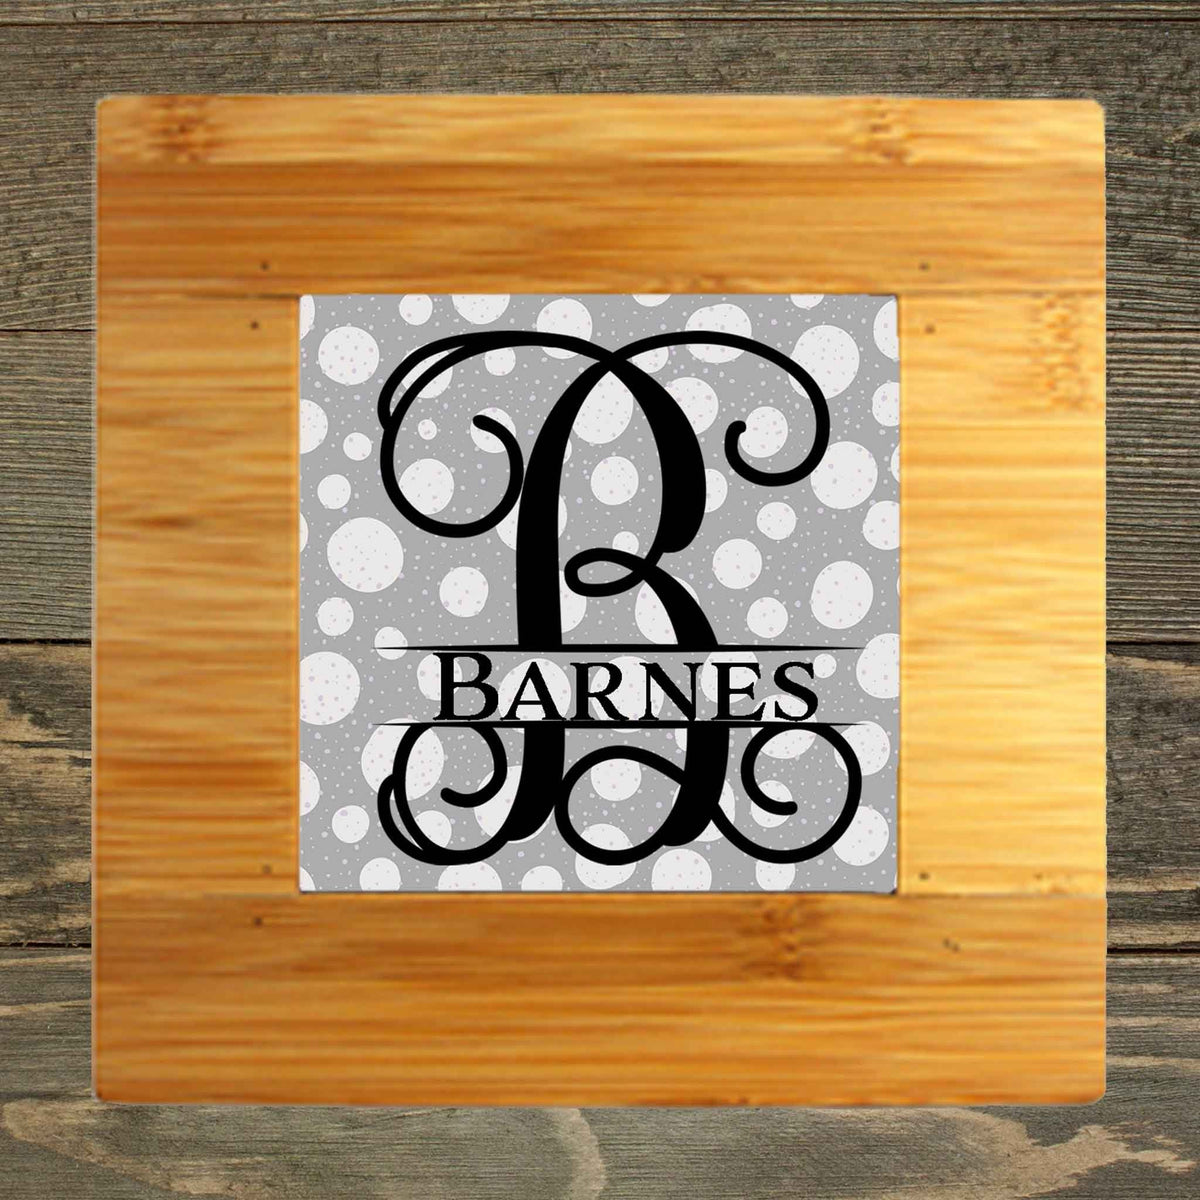 Personalized Iron Trivet | Custom Kitchen Gifts | Gray and White Polka Dots